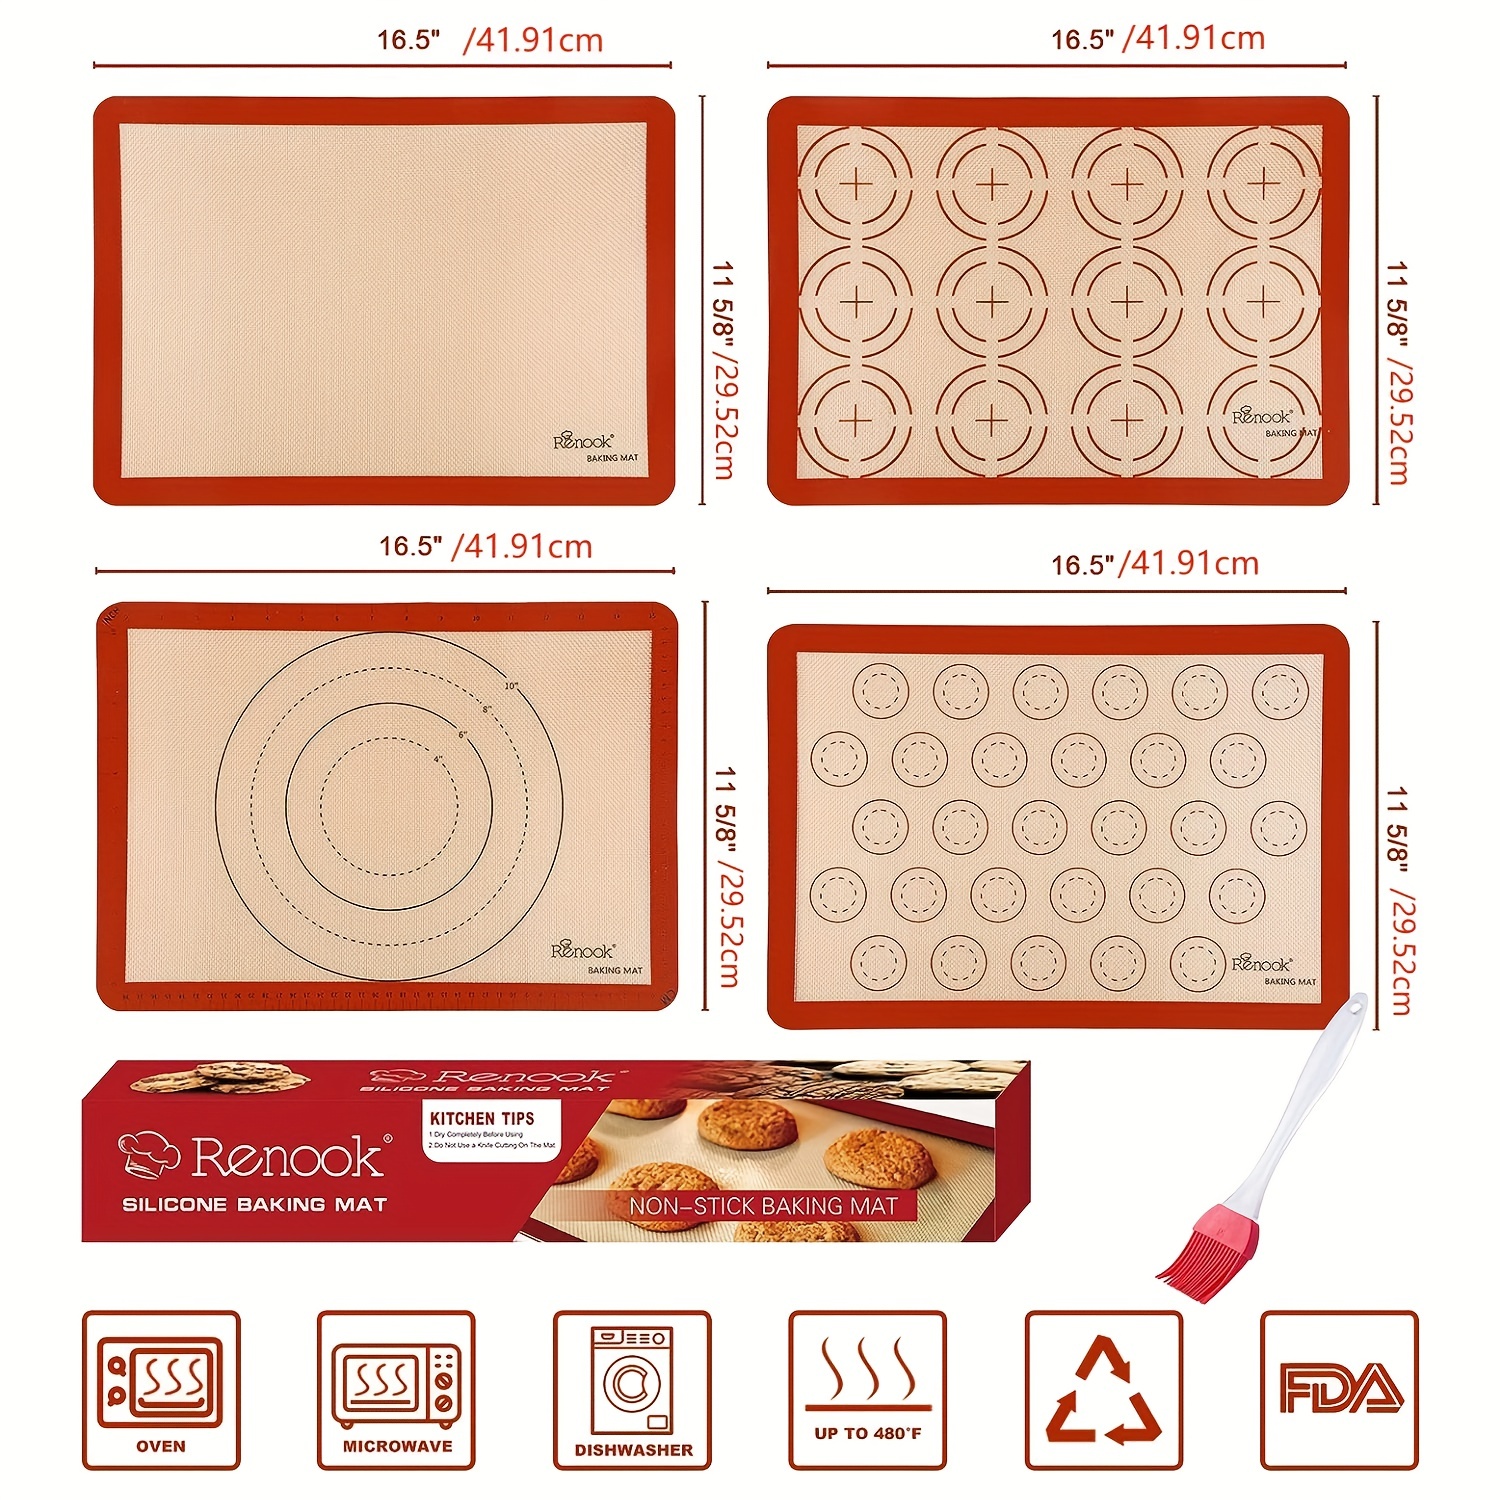 Silicone Baking Mat Macaron - Set of 3 (2 Half Sheet Liners and 1